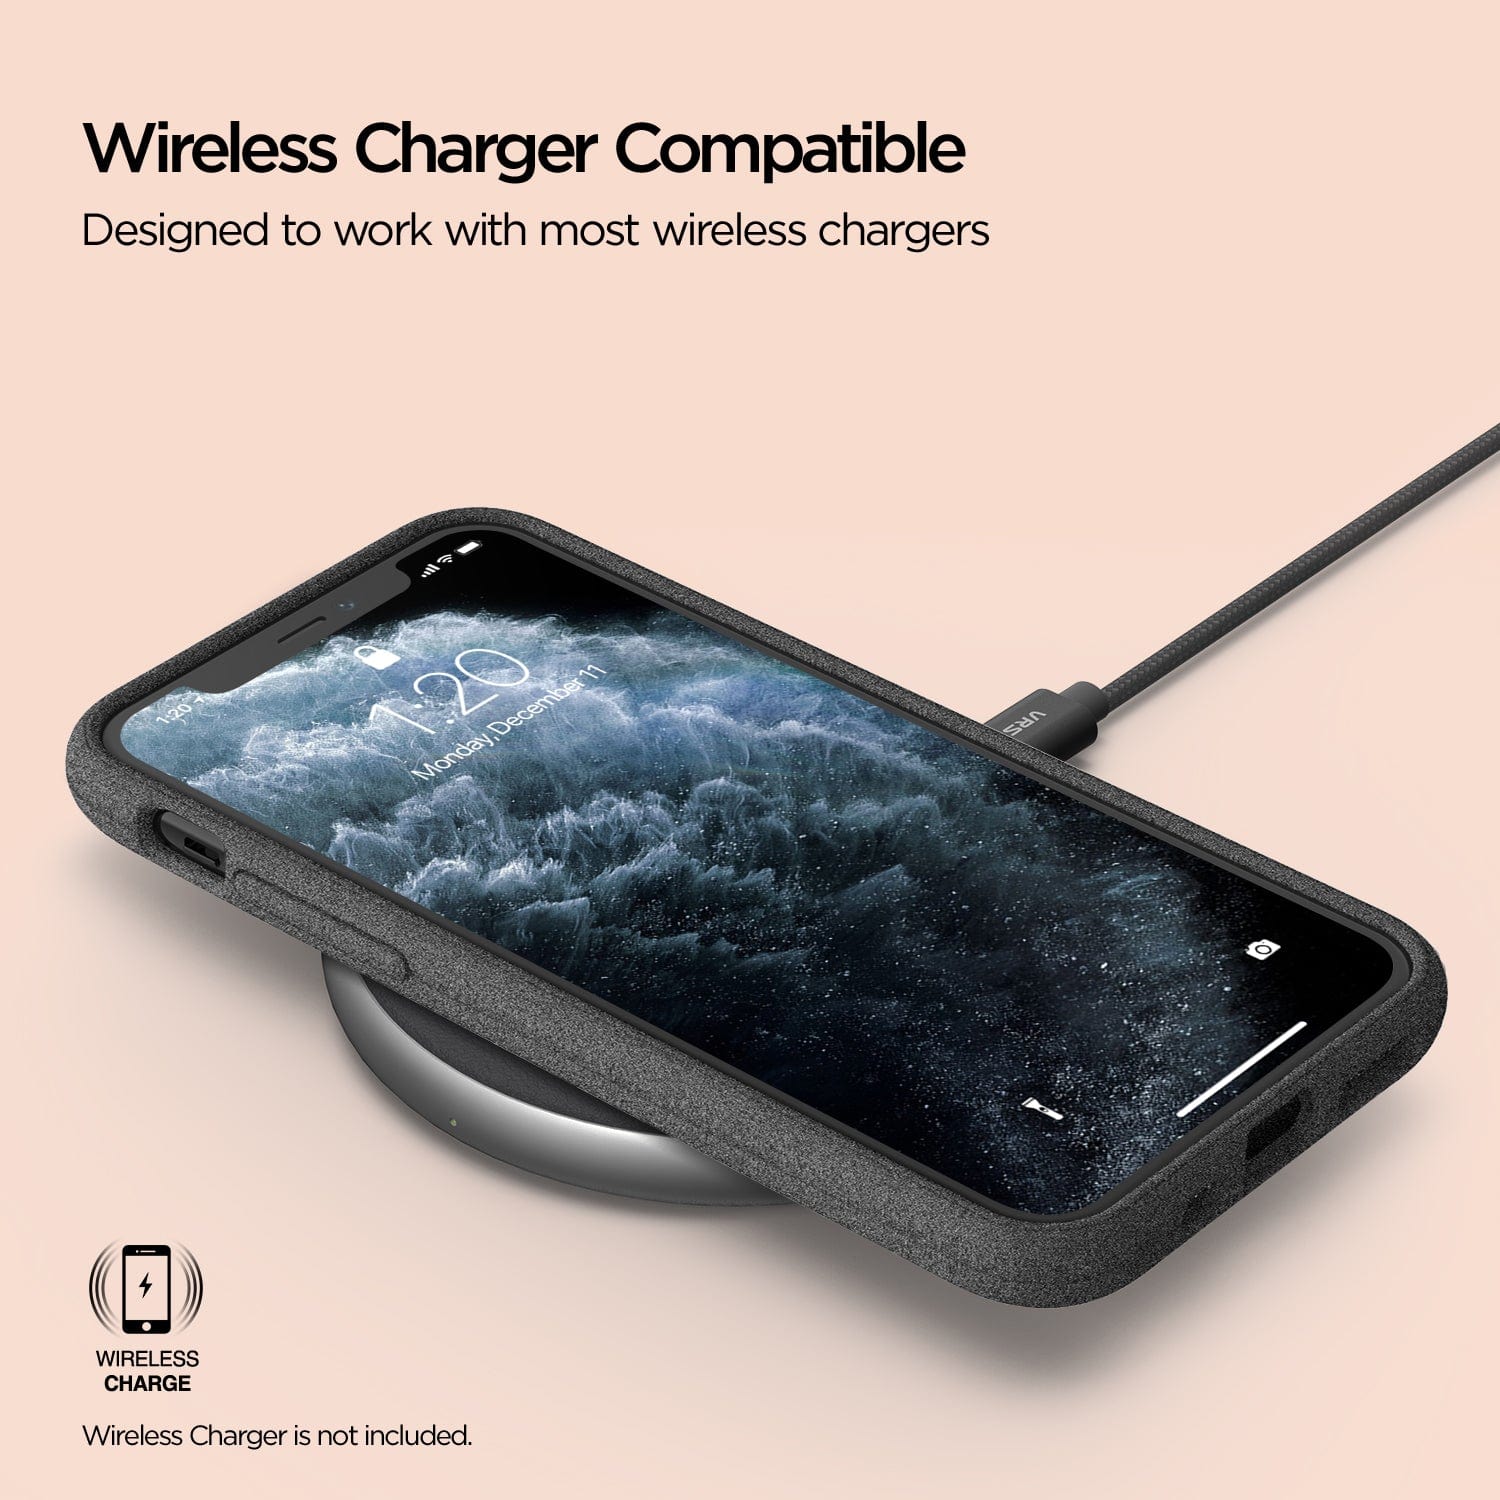 Wireless charger case compatible with most wireless chargers